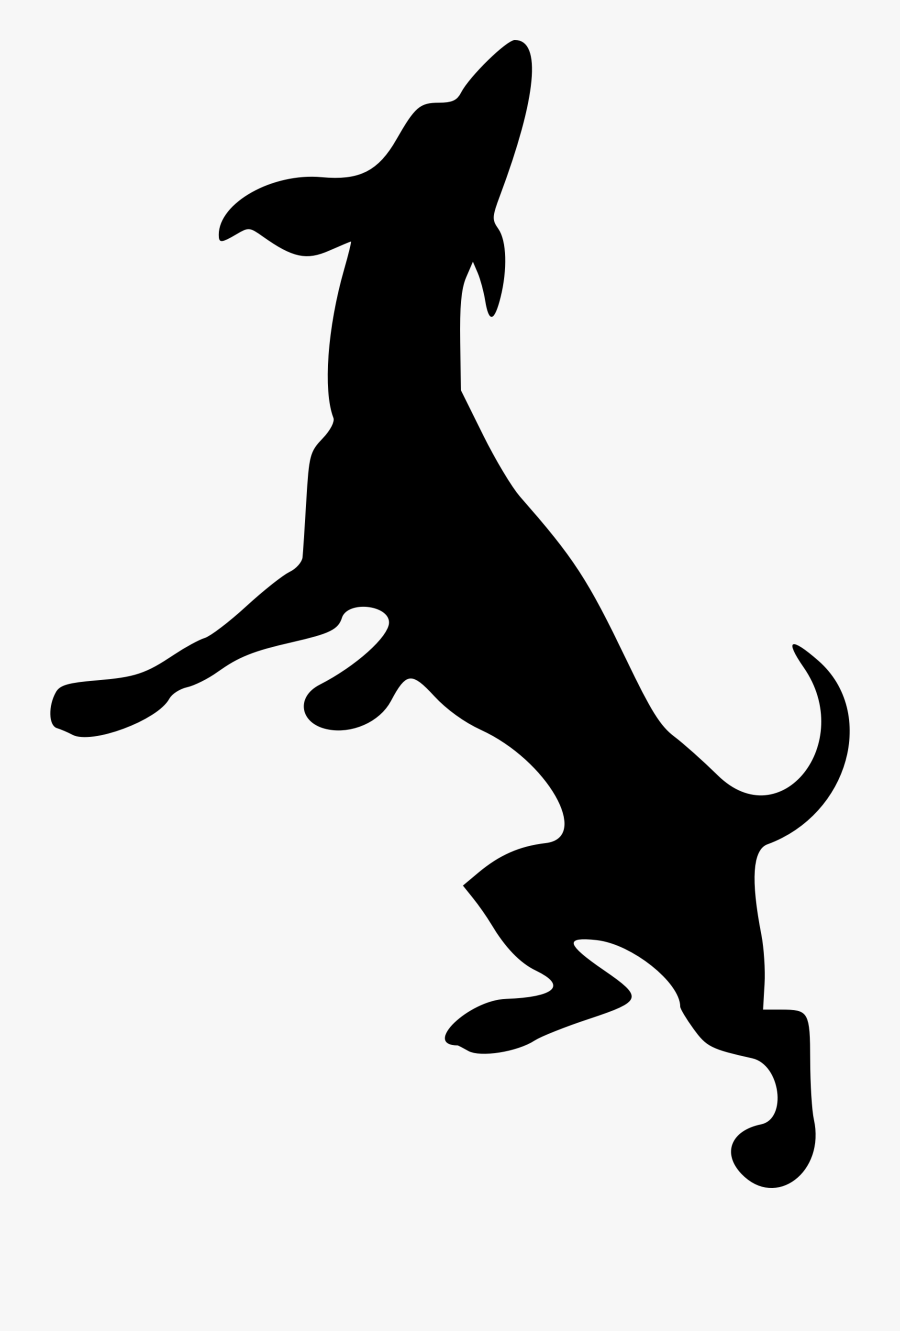 Dog Silhouette - Playful Dog Silhouette Png, Transparent Clipart